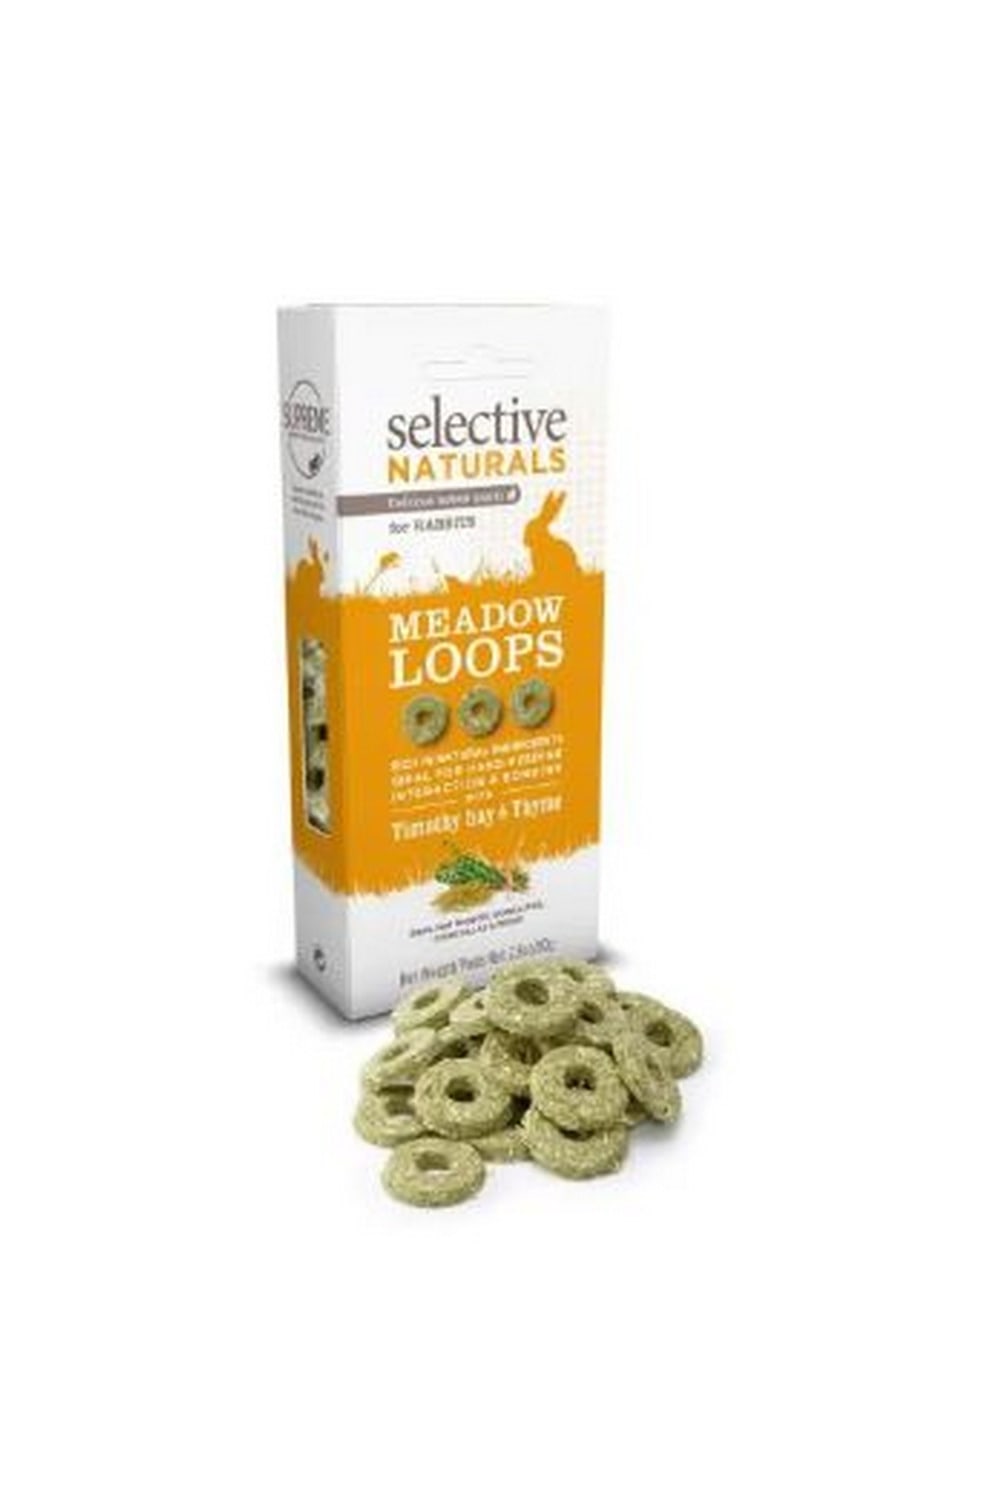 Selective Naturals Meadow Loops with Timothy Hay Rabbit Treats (4 Packs) (Timothy Hay and Thyme) (2.28oz)